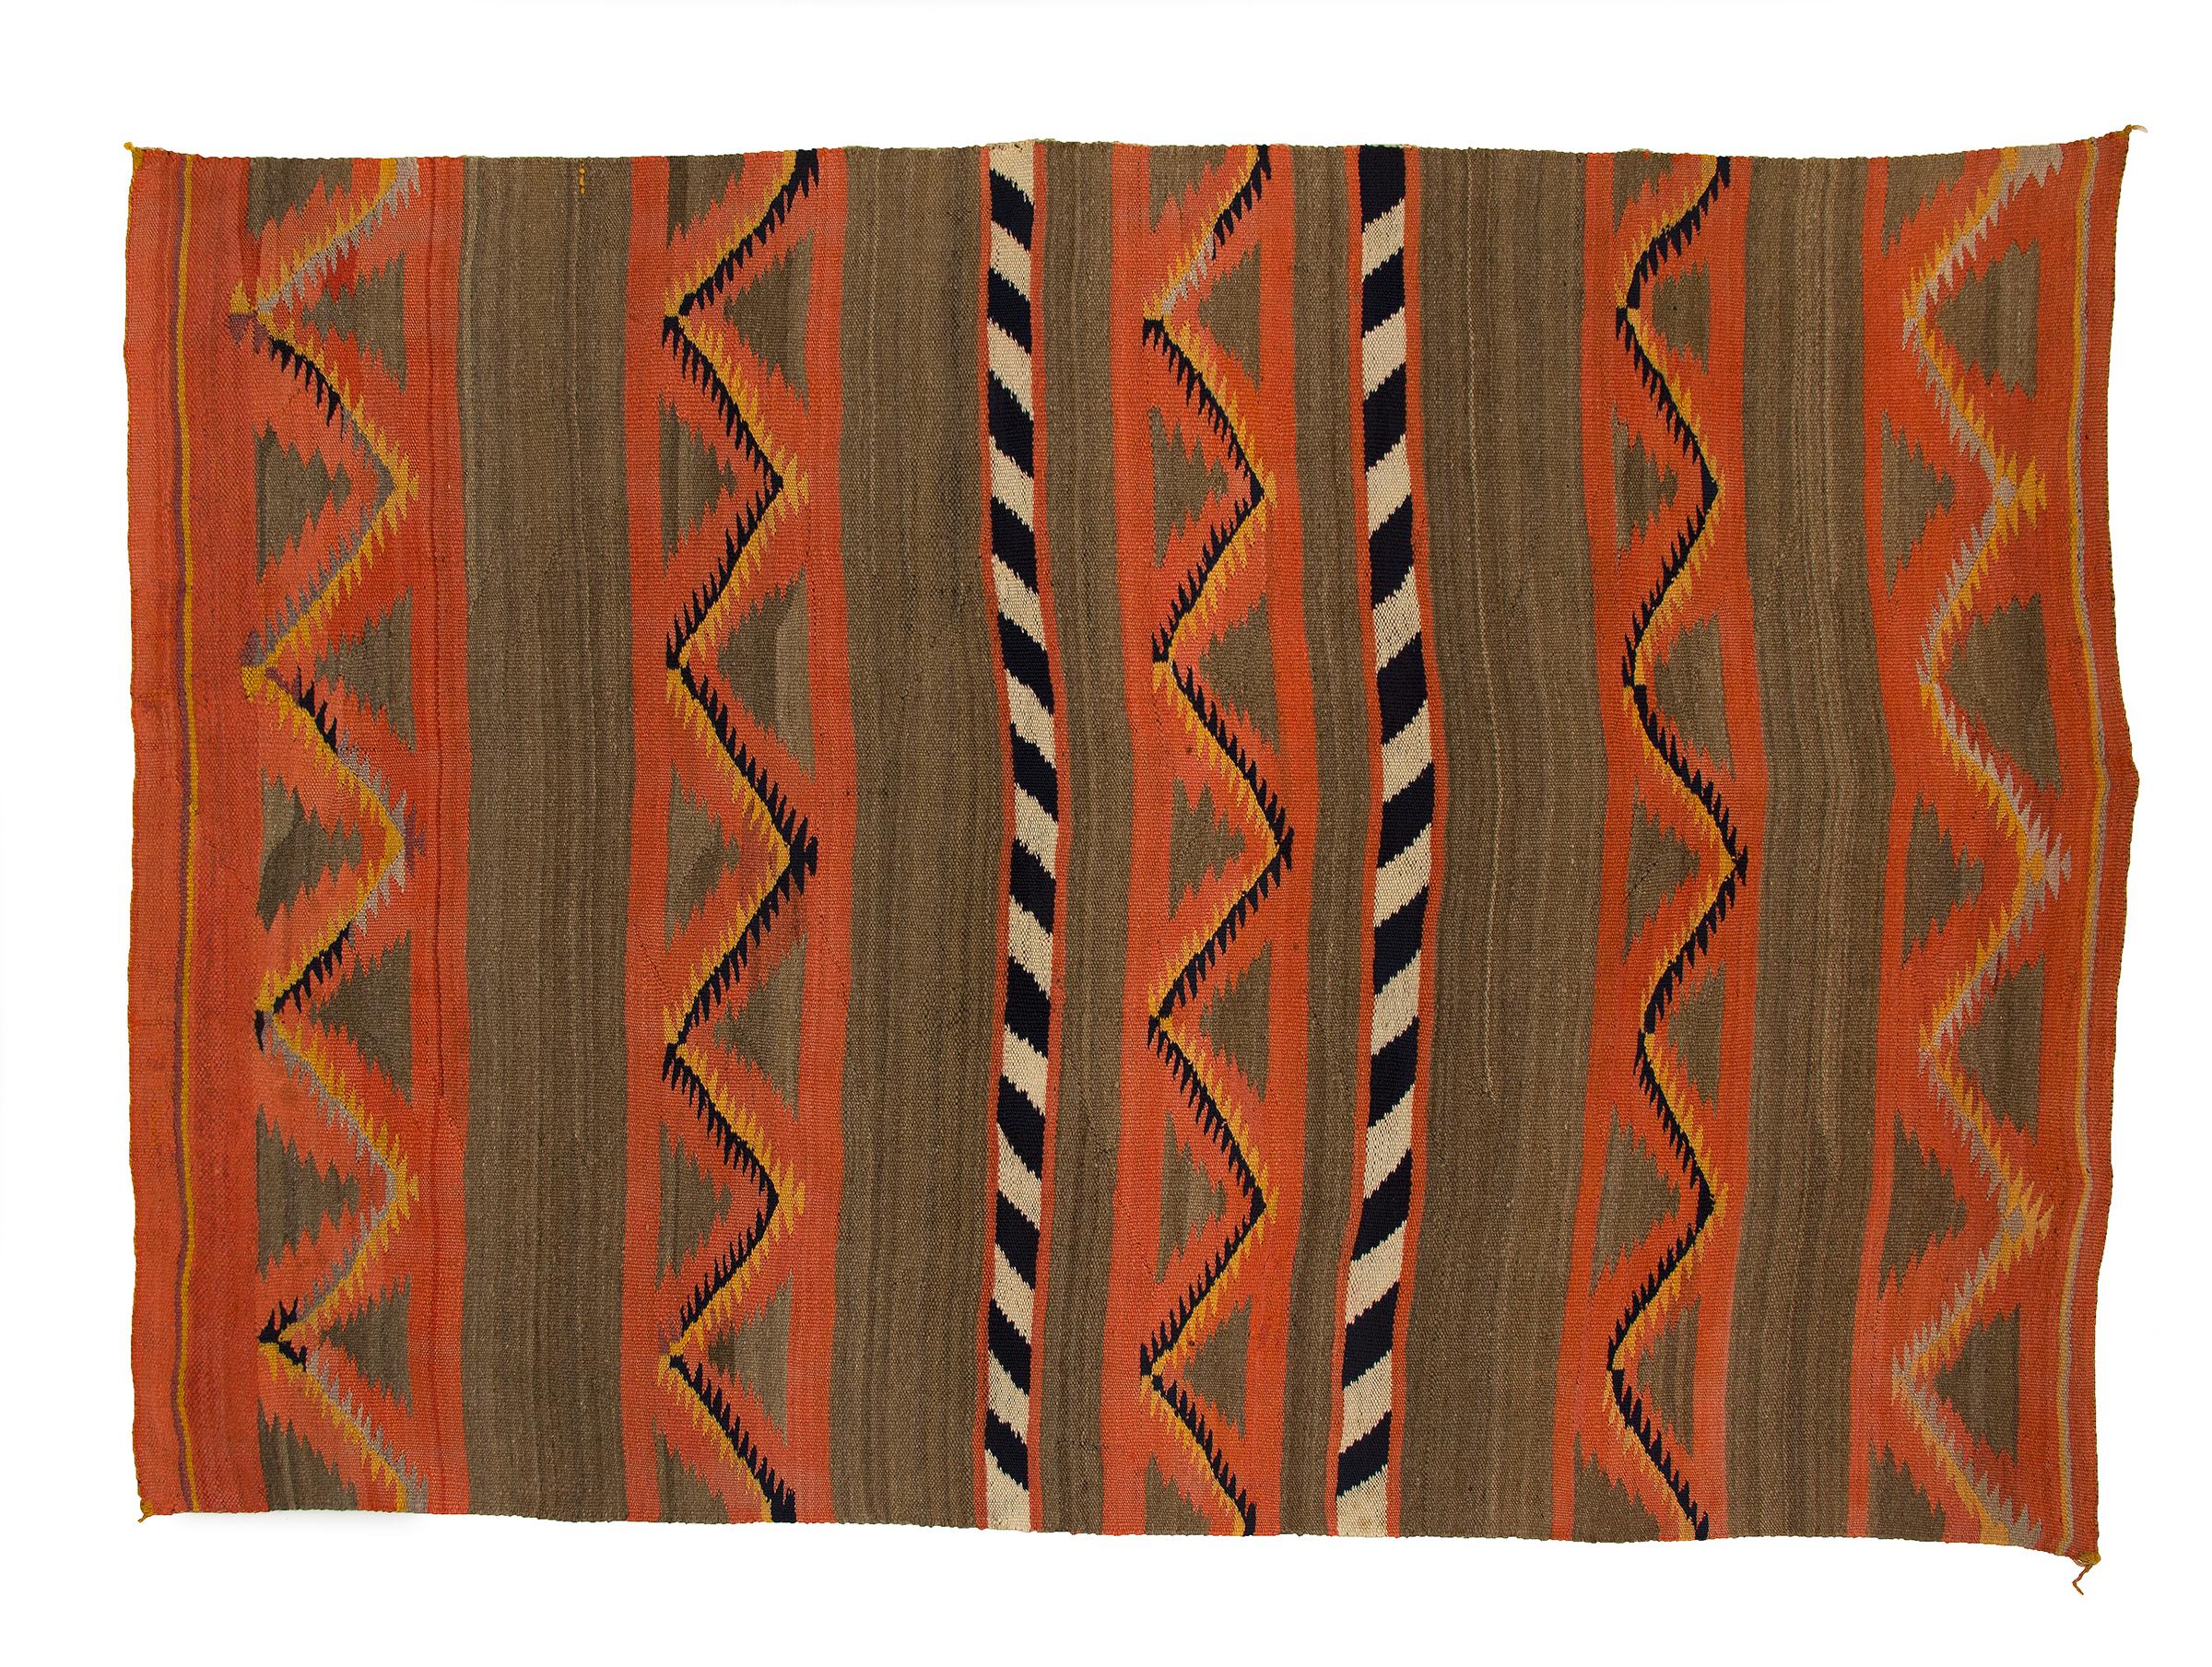 Antique 19th century (circa 1880-1900) Navajo Blanket, woven in a sarape format with a banded design in native handspun wool with natural fleece colors of gray/brown, ivory and black with aniline dyed red/orange and yellow. 
This textile is best